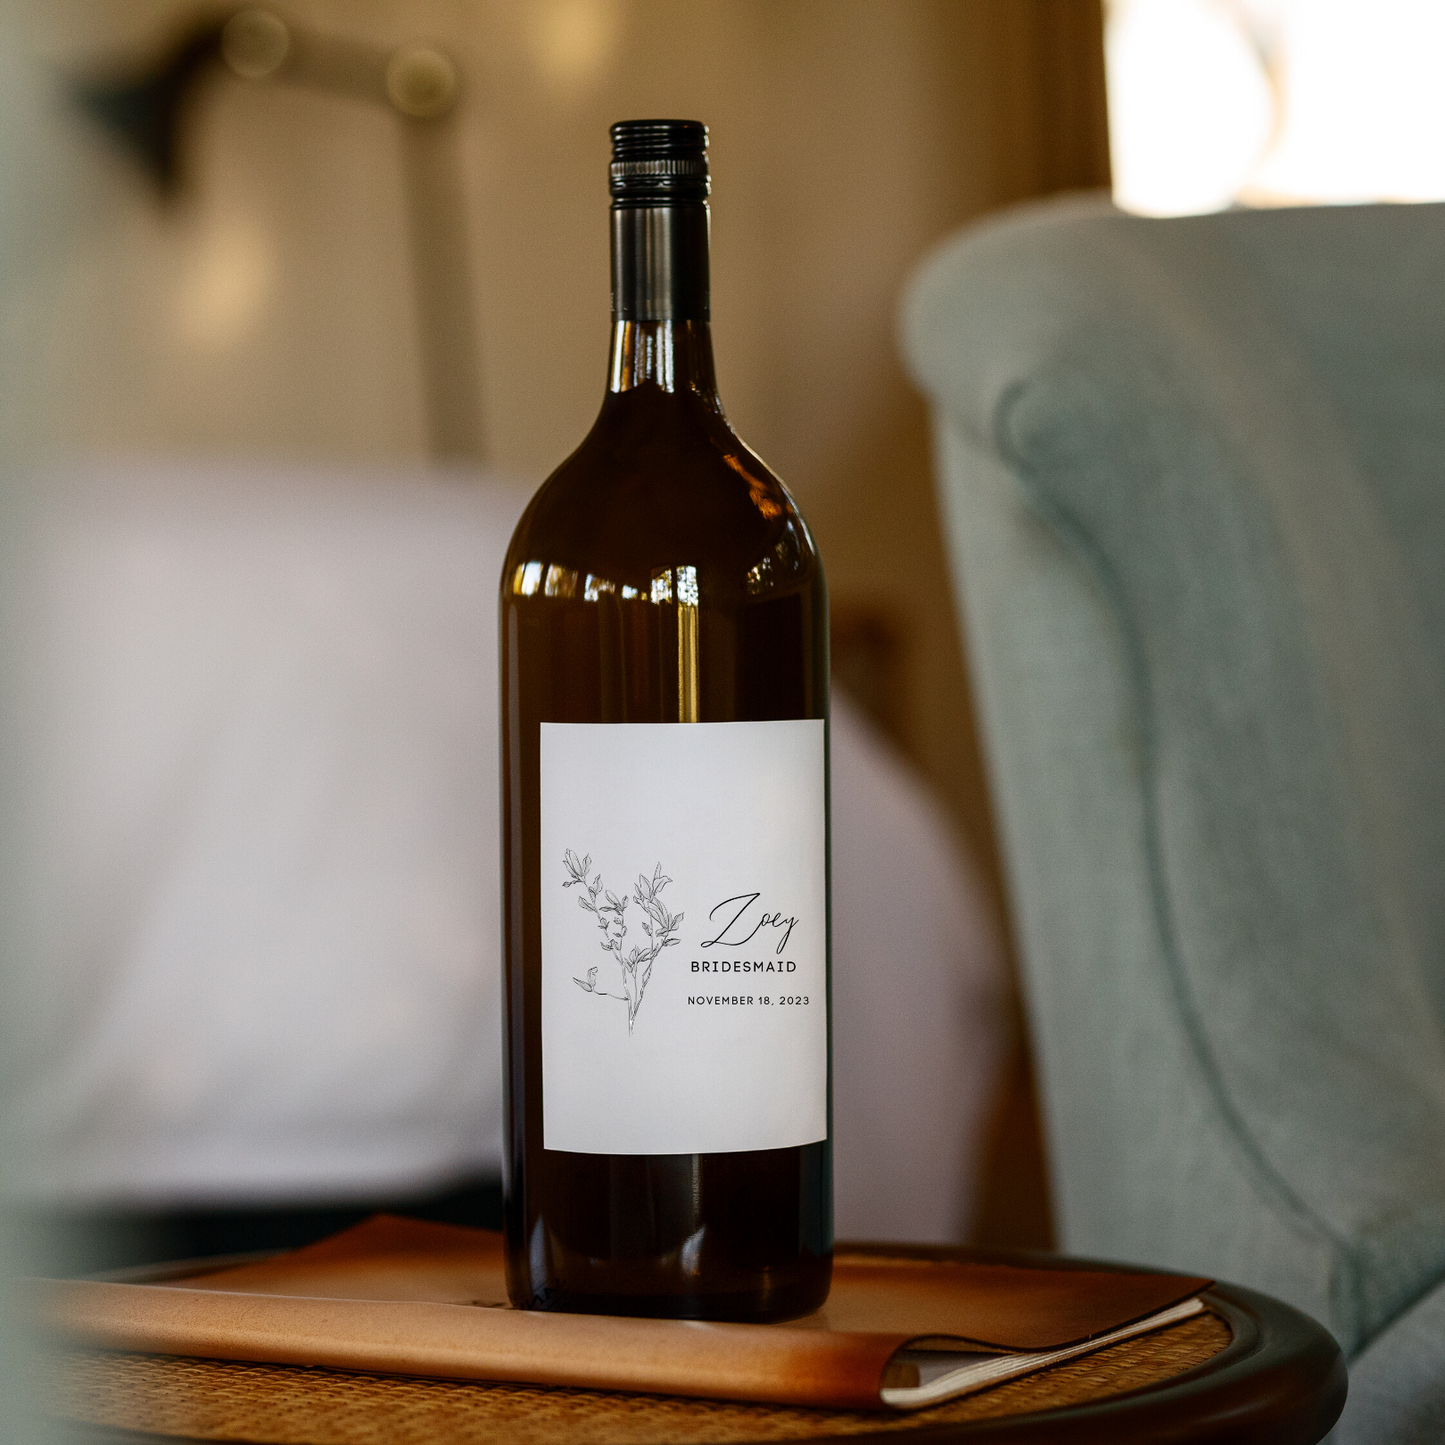 A dark drown wine bottle sits on a wooden side table in a cozy living room. The label on the wine bottle has a minimalist flower design on the left and the words "Zoey", "Bridesmaid" and "November 18, 2023 to the right.